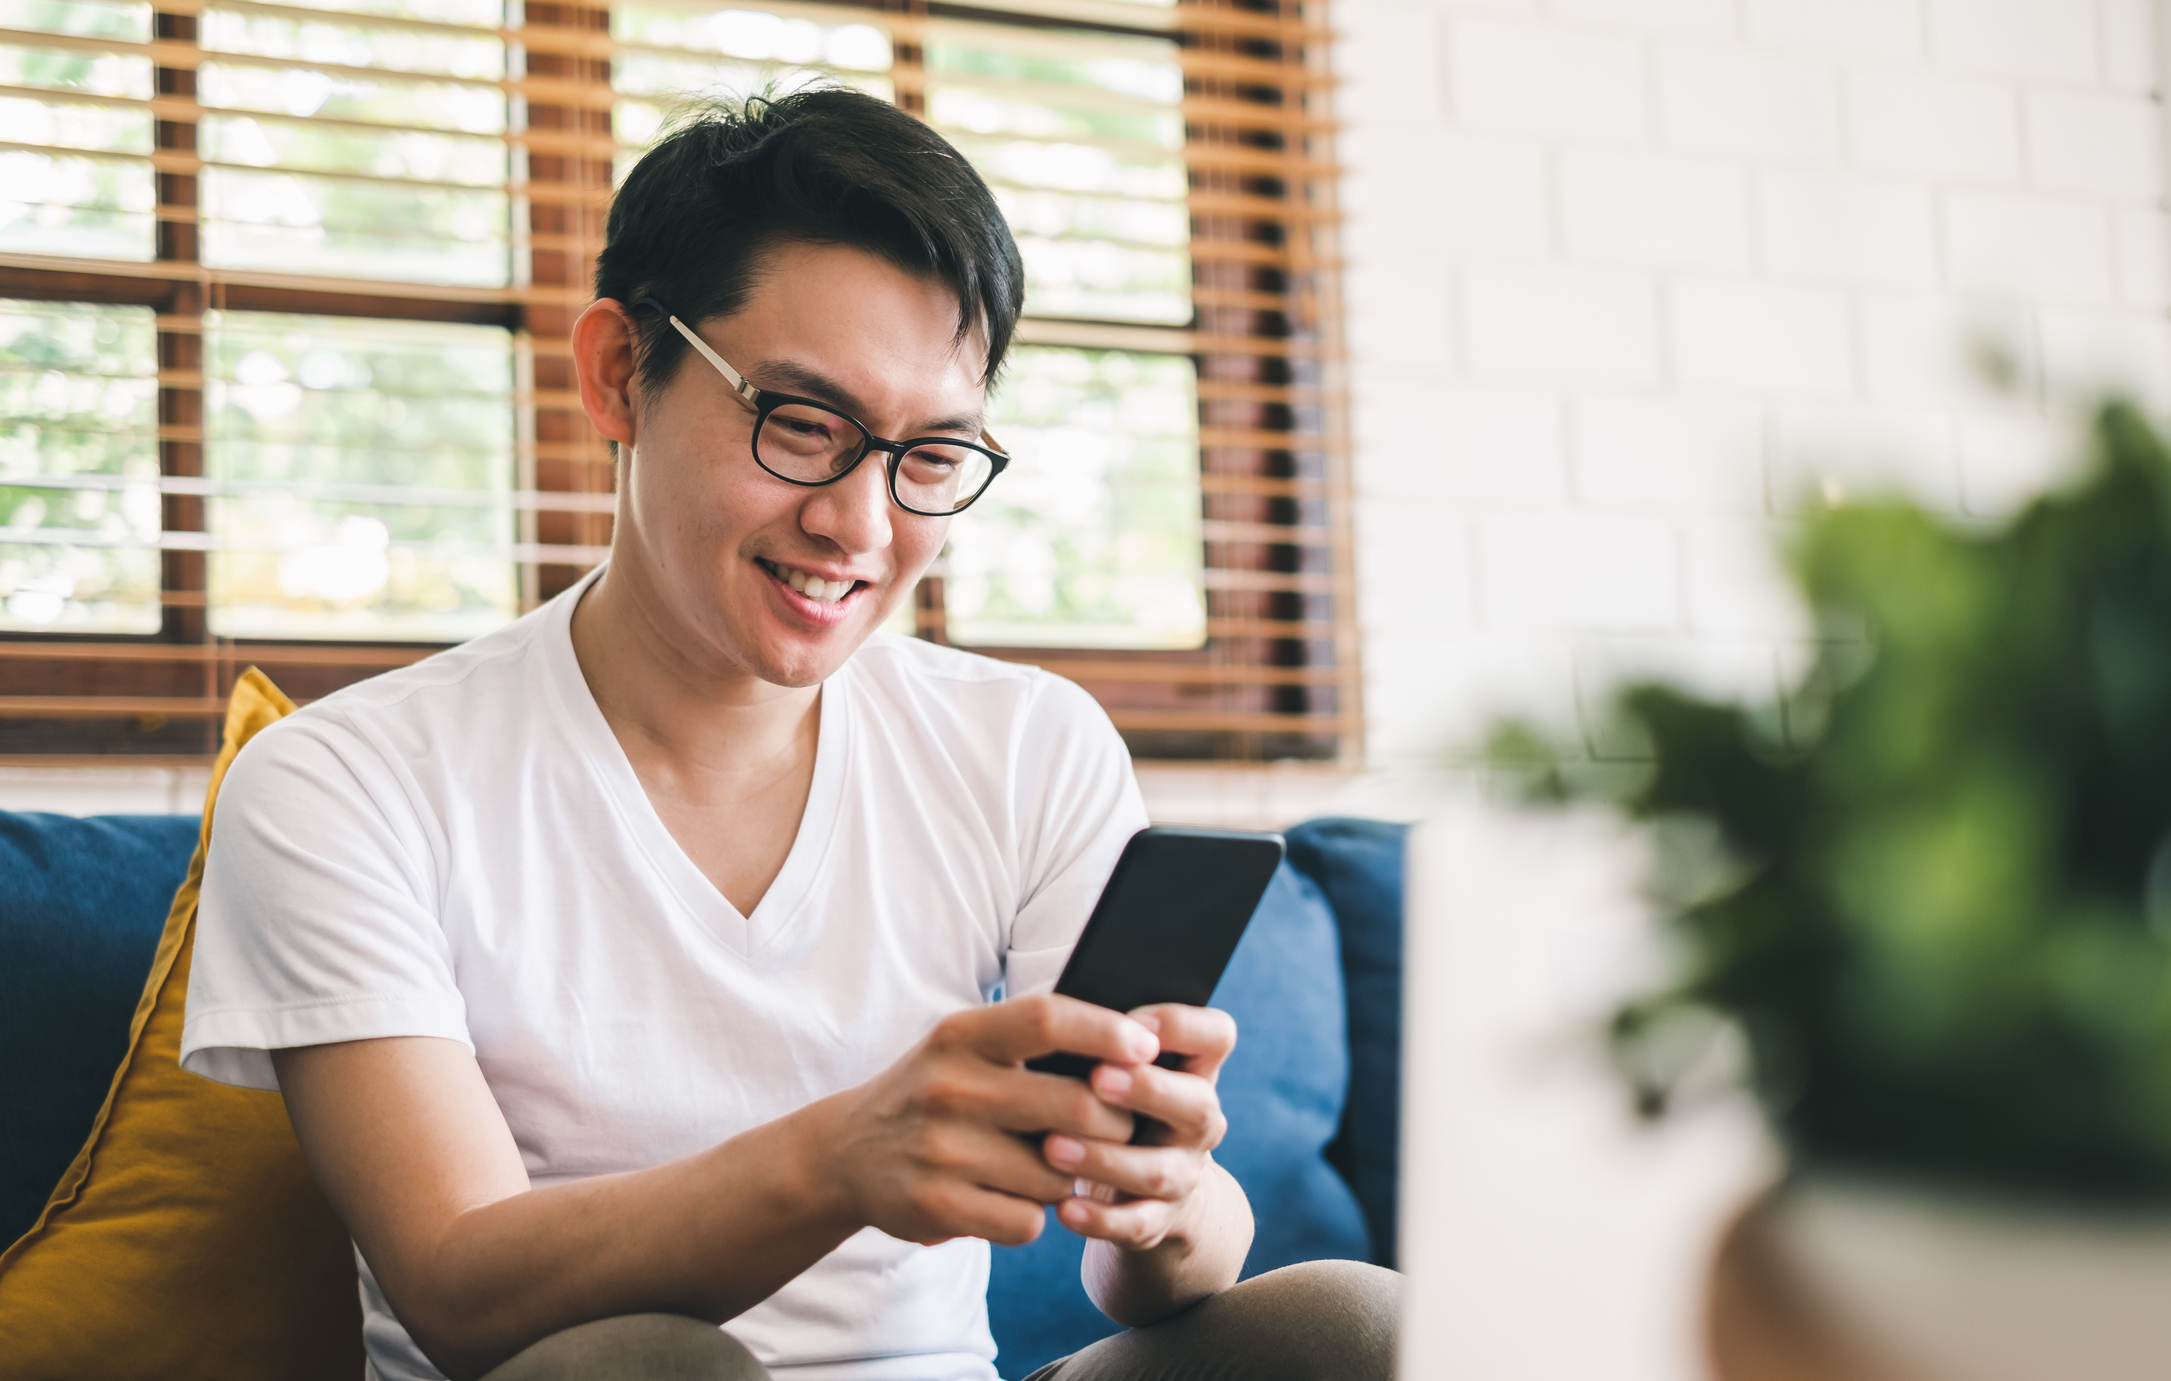 Stock Photo of Man Sitting on Sofa Looking at His Cell Phone and Smiling